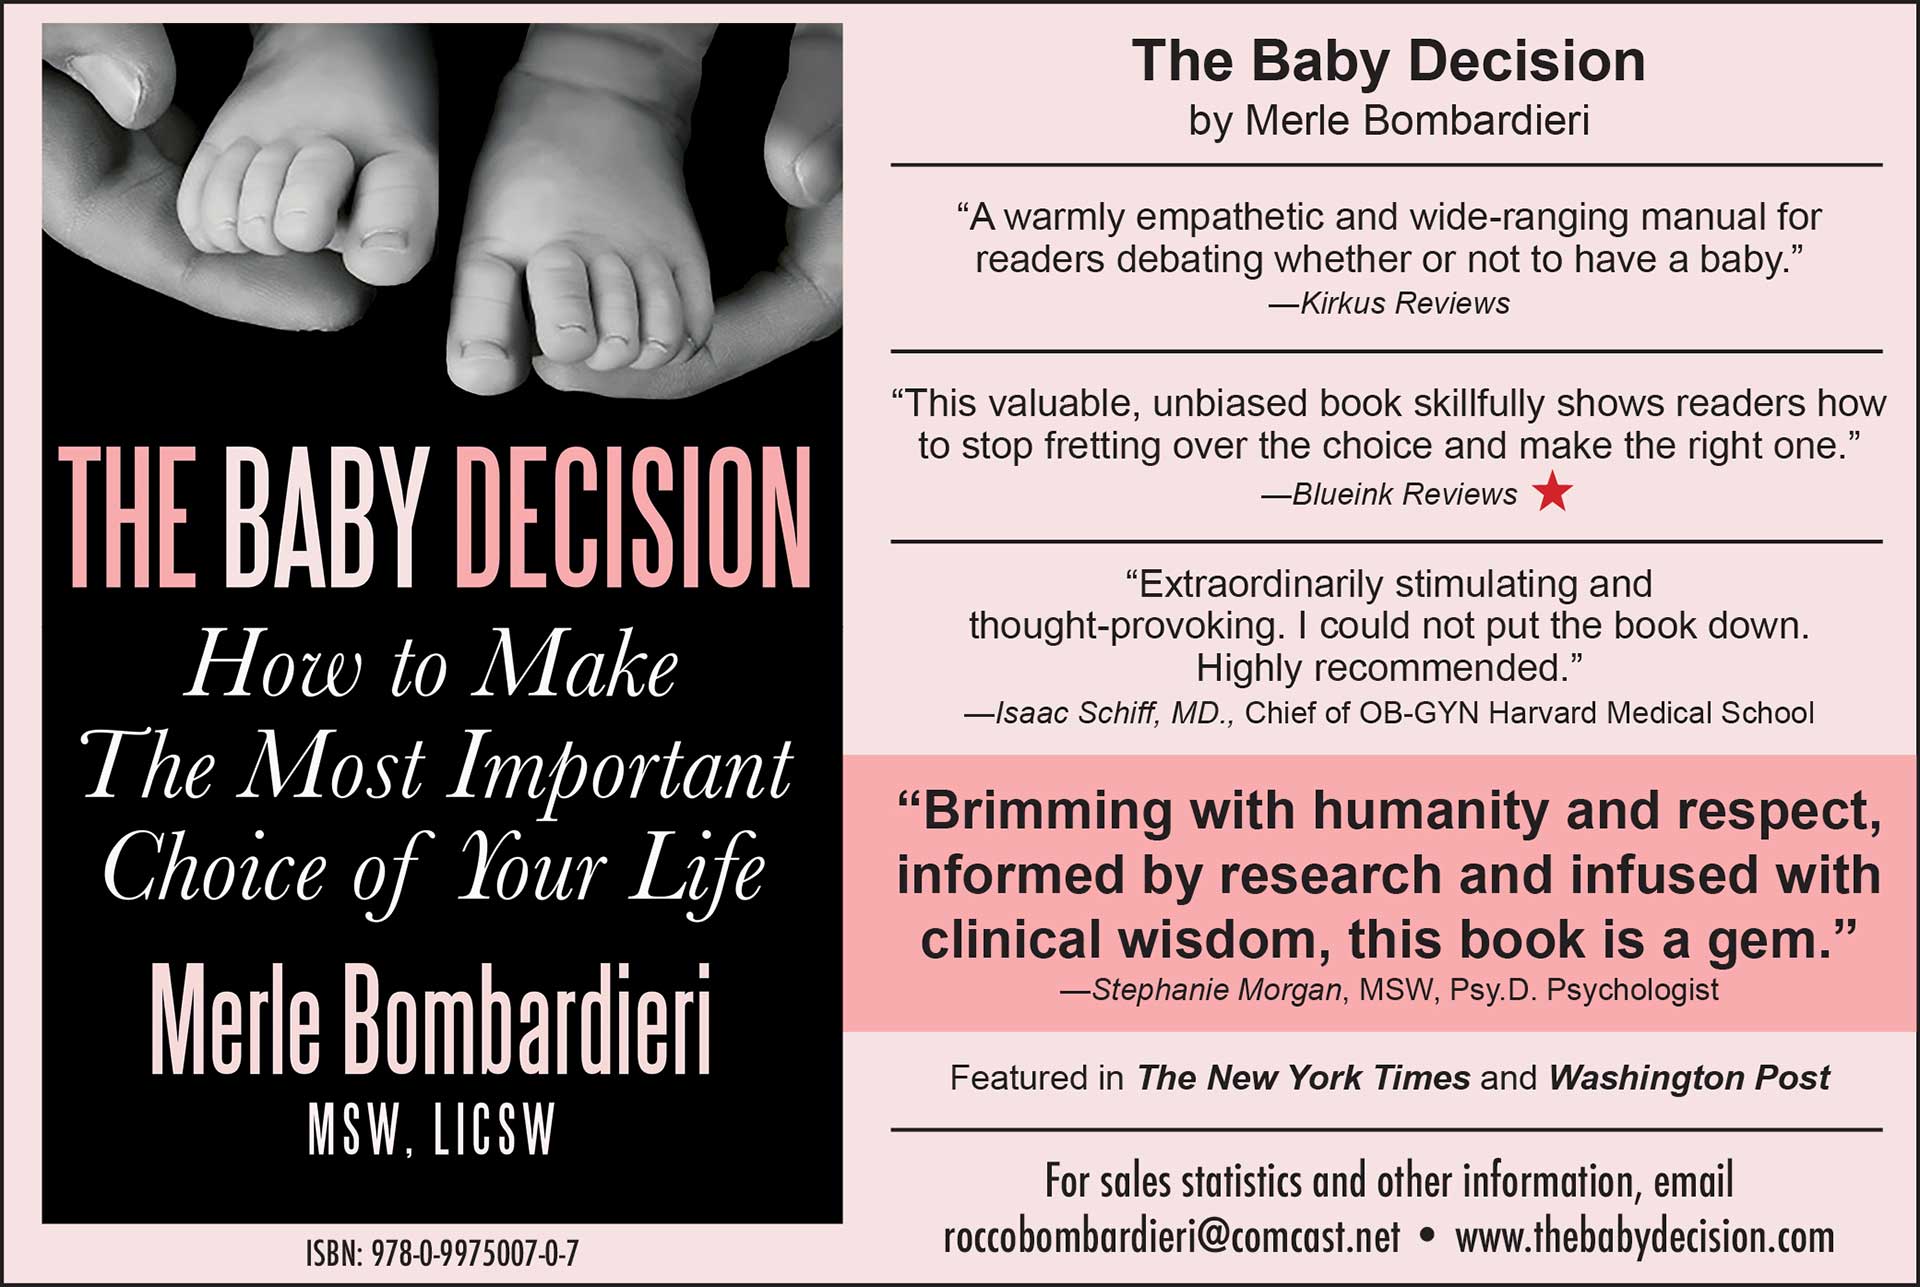 The Baby Decision reviews